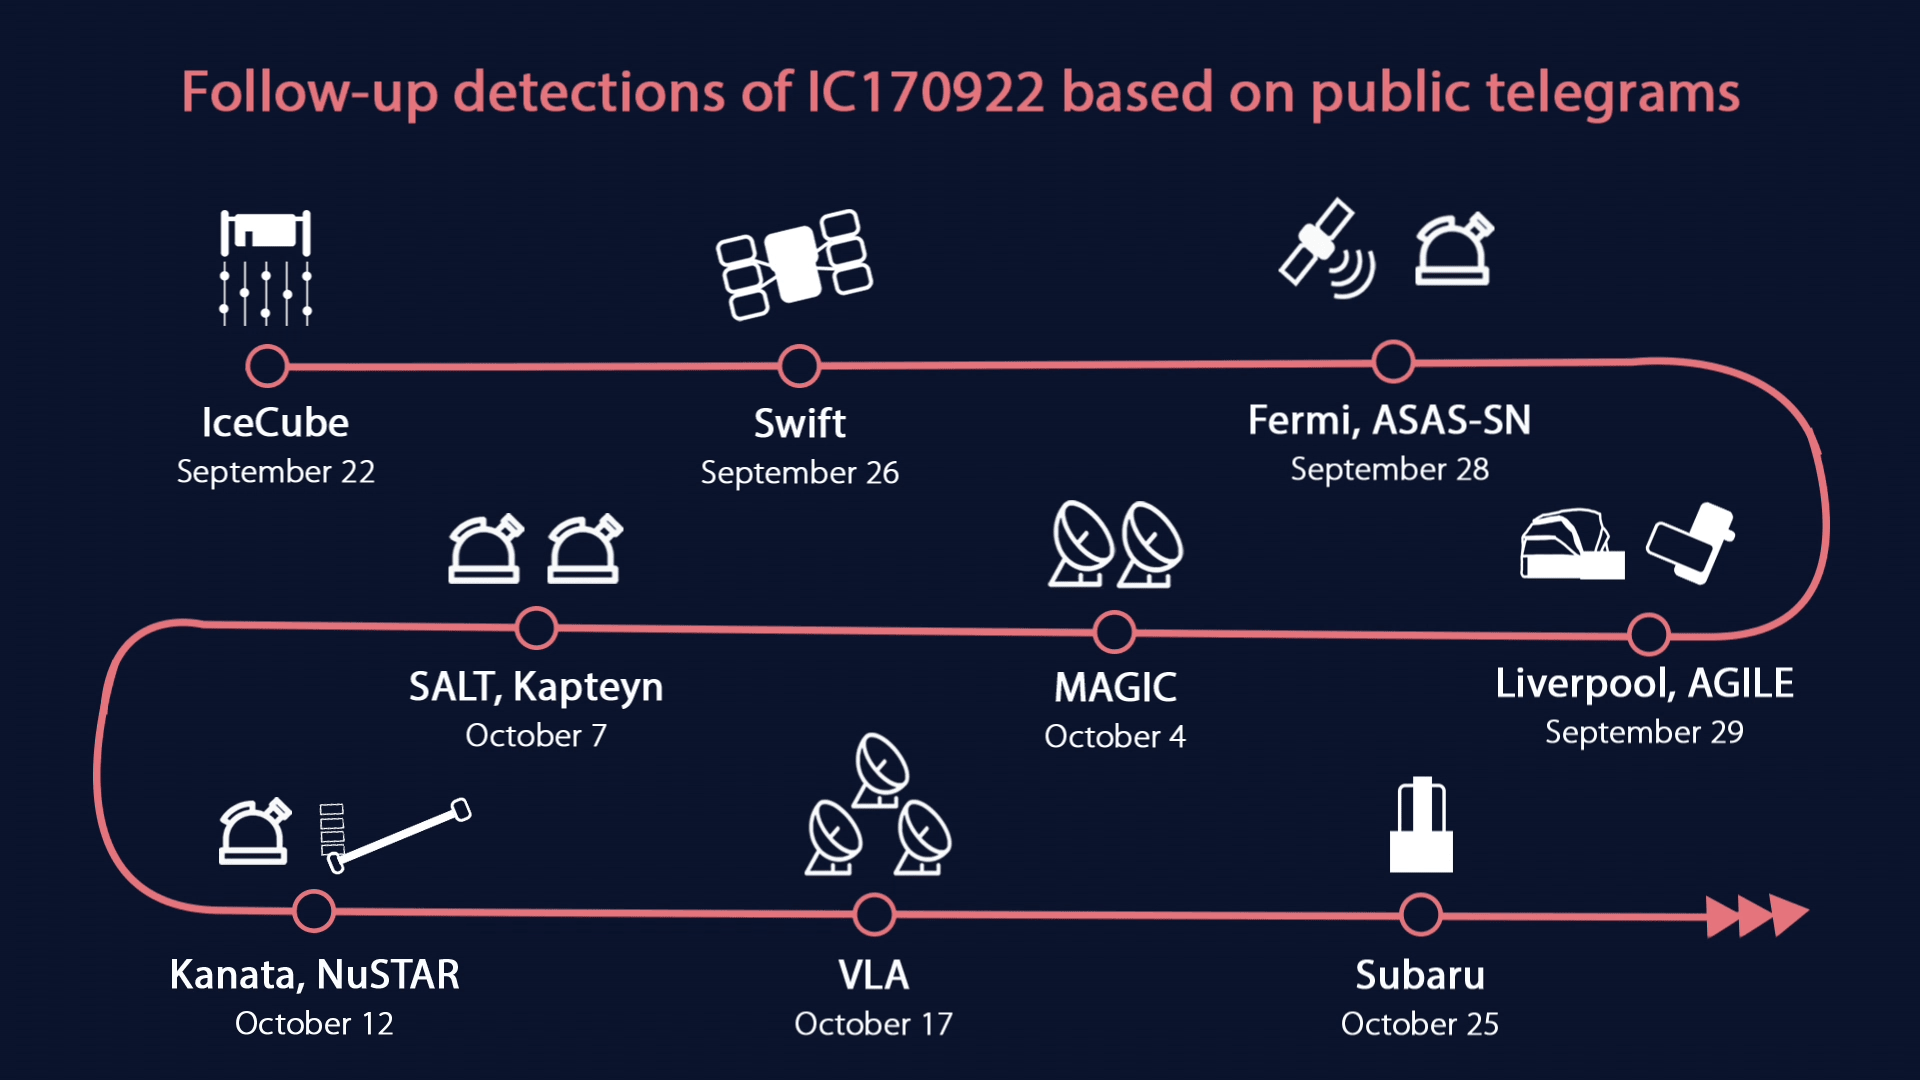 Follow-up detections of IC170922 based on public telegrams